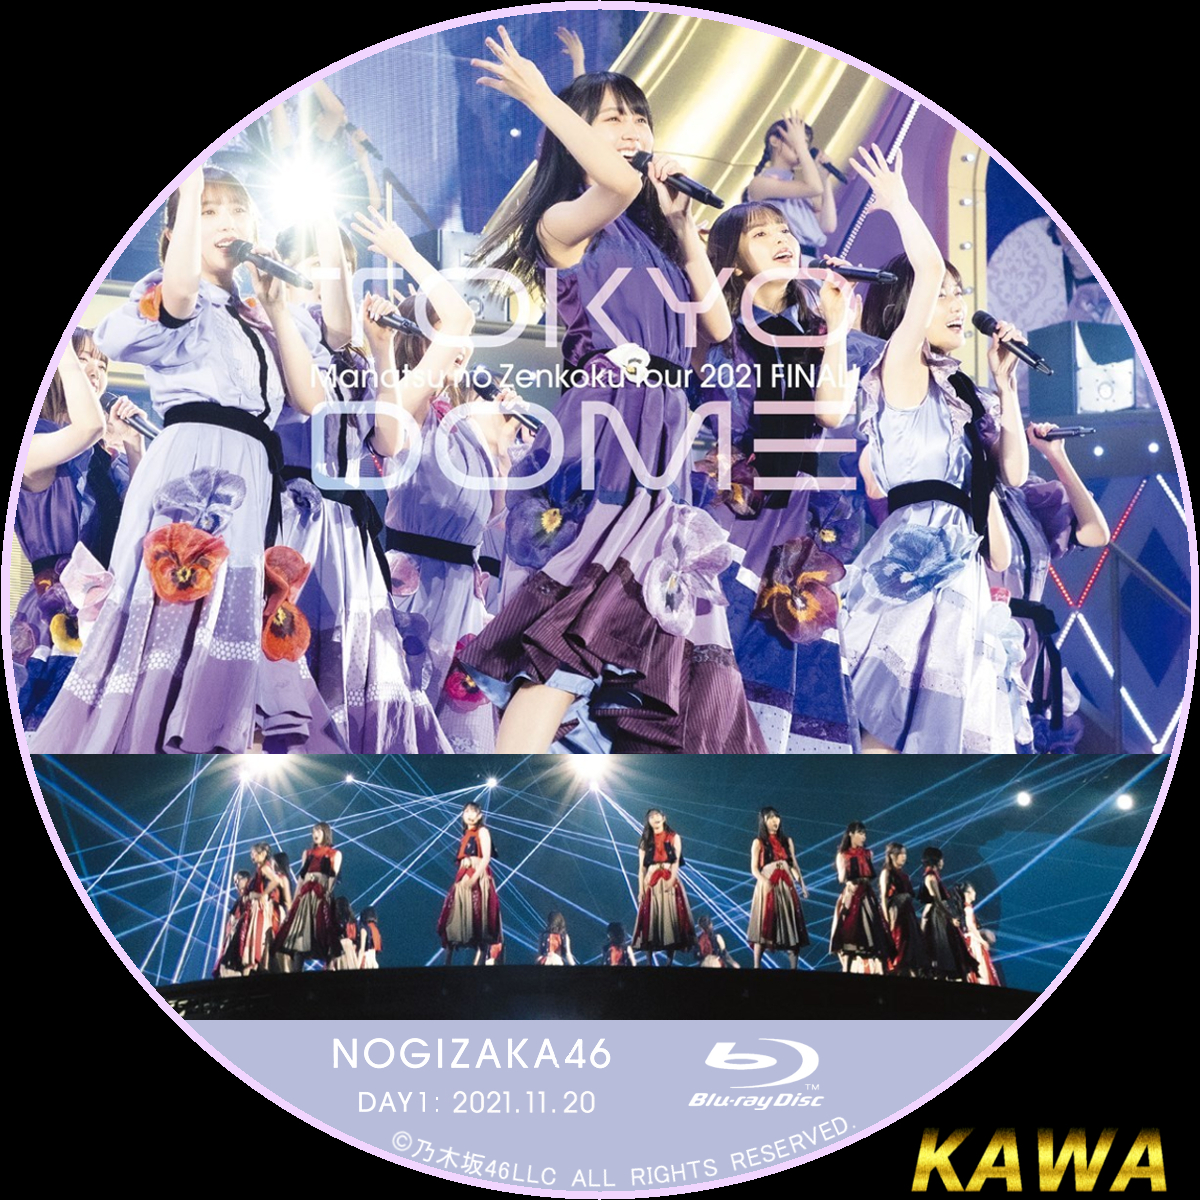 SALE／64%OFF】 乃木坂46 真夏の全国ツアー2021 FINAL IN TOKYO DOME